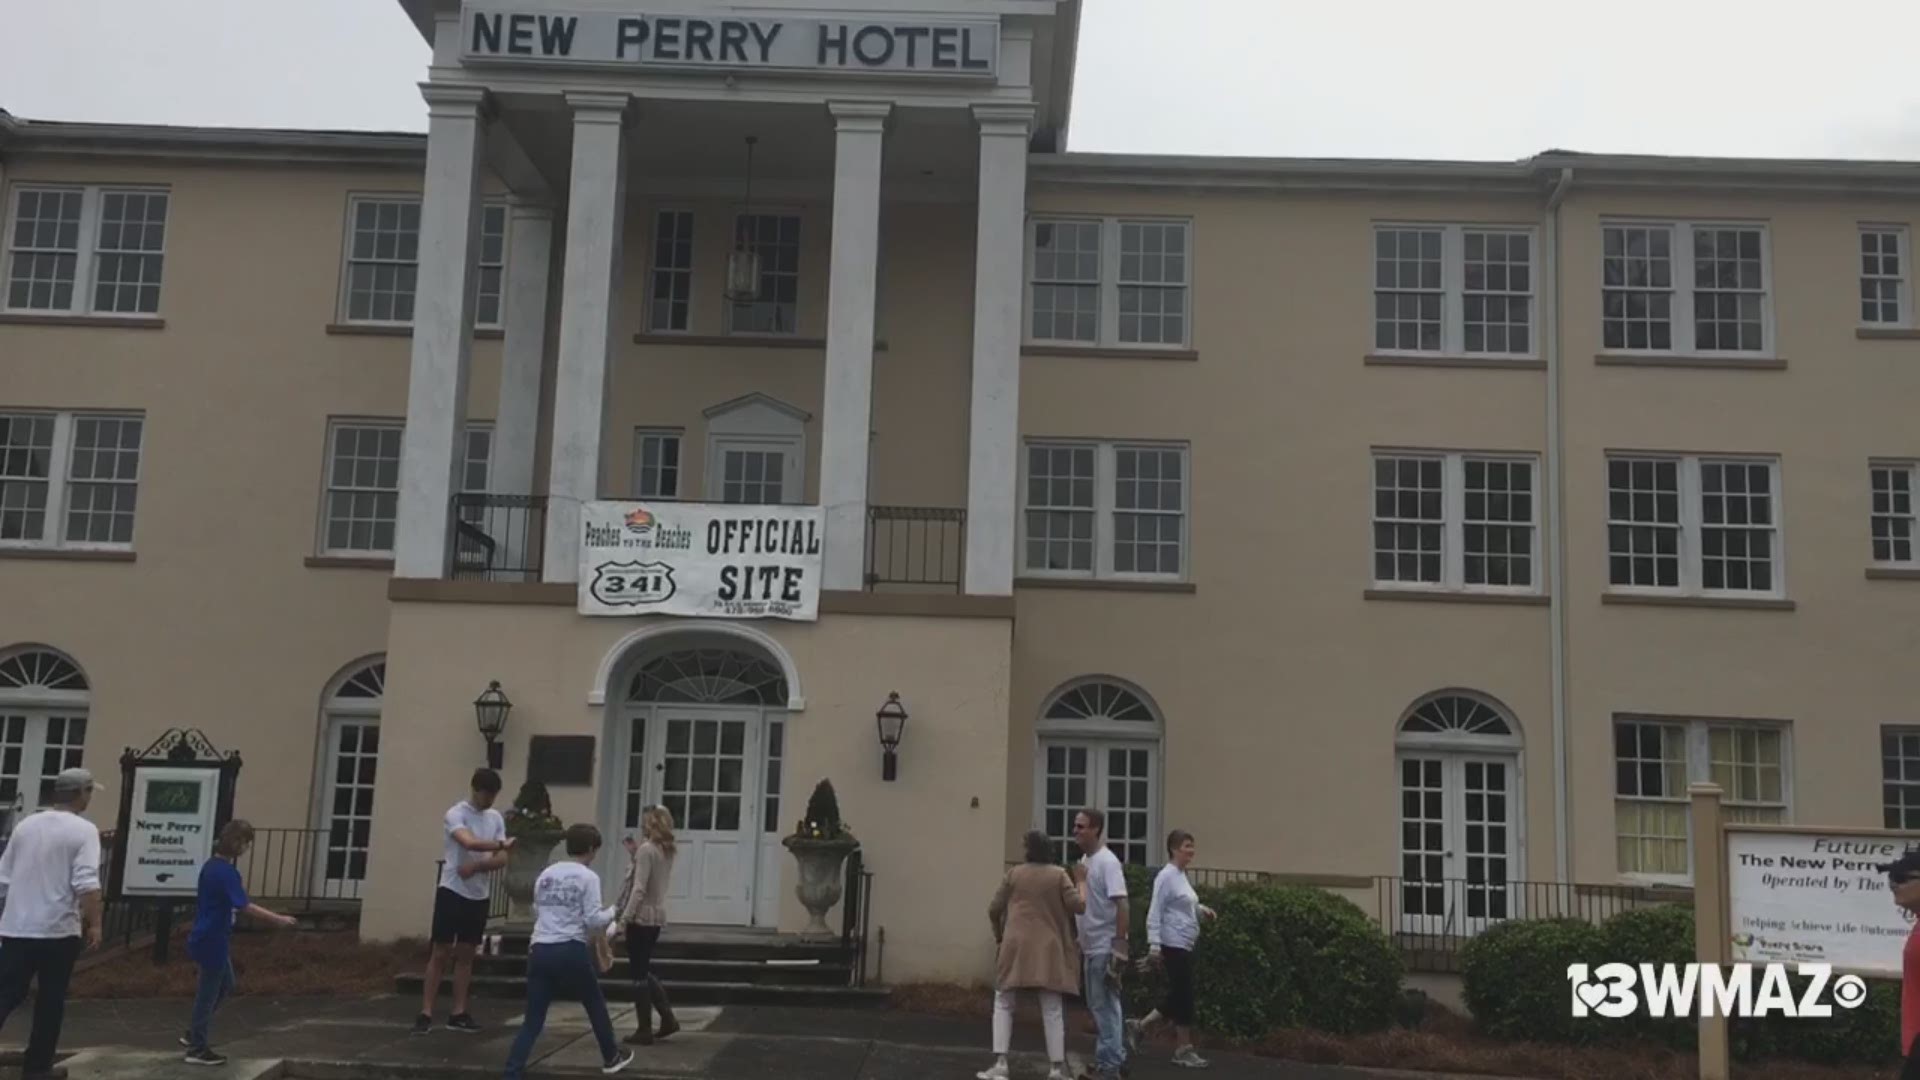 Hotel rooms and a restaurant space are in store for the New Perry Hotel, located on Main Street in Perry. The hotel is being renovated by HALO Group -- a non-profit whose goals are to train, house and employ adults at the hotel with developmental disabilities.